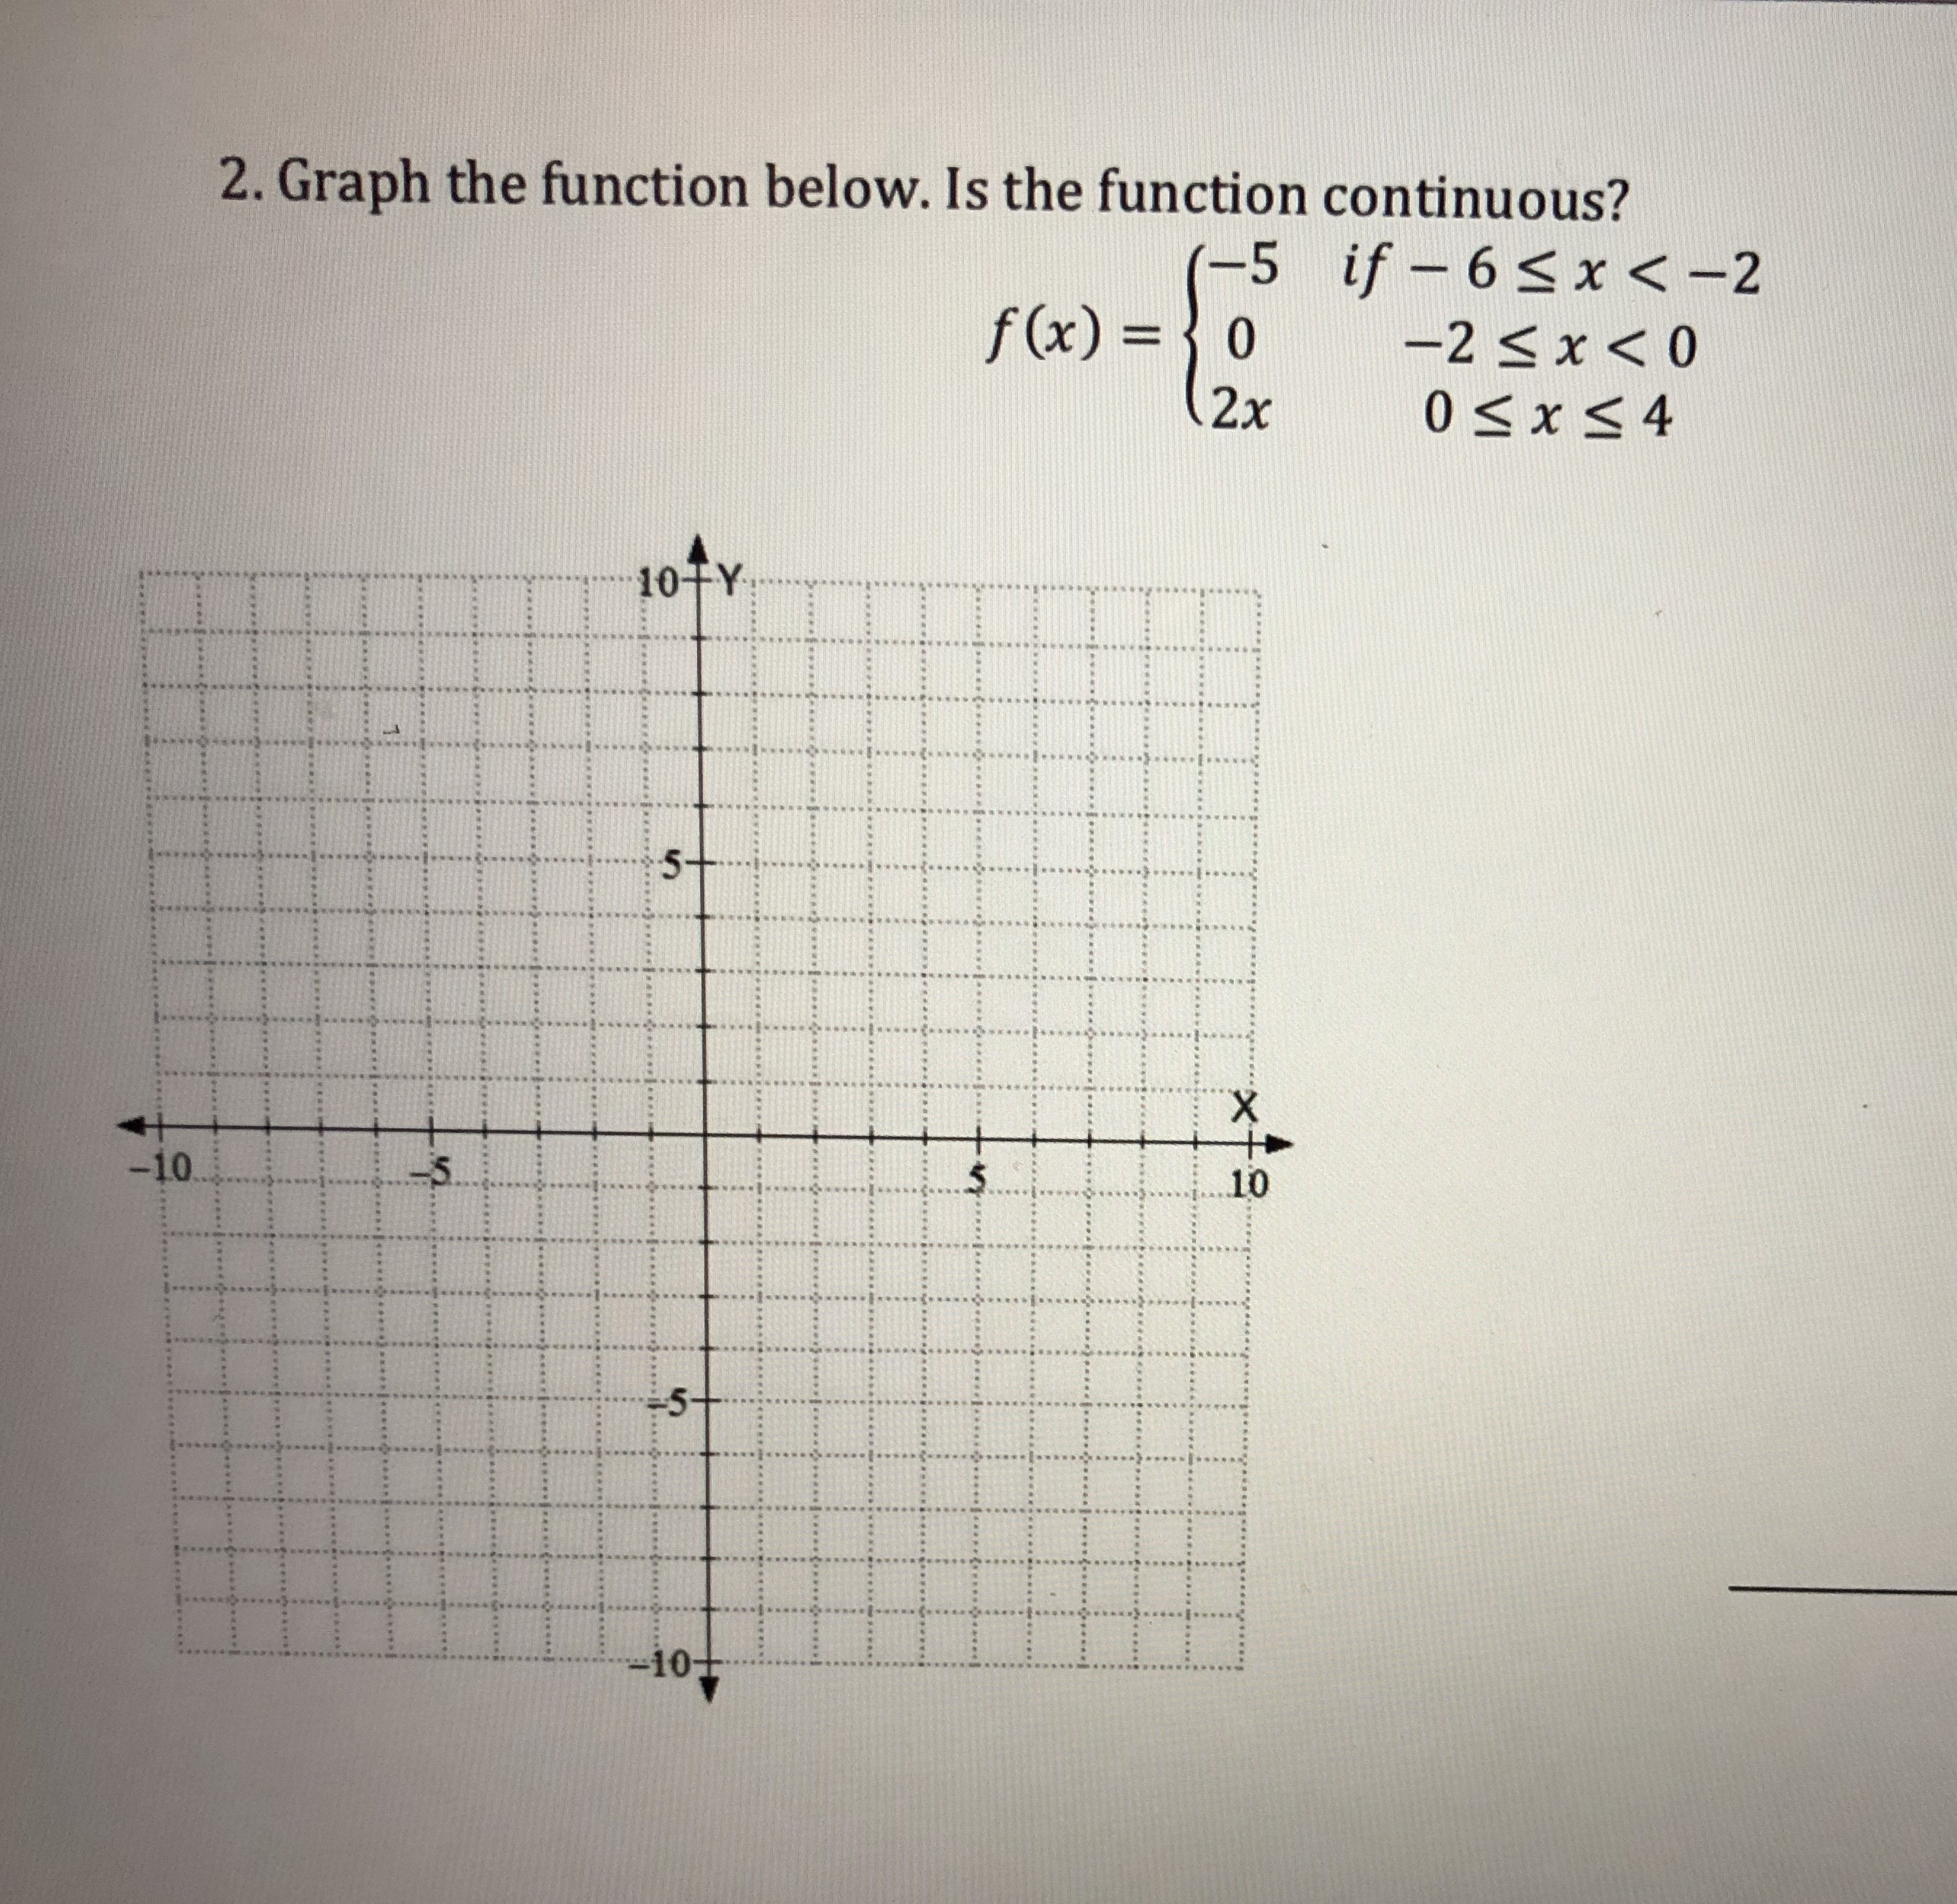 Graph the function below. Is the function continuous?
f (x)o
2x
10TY
5
10
10
